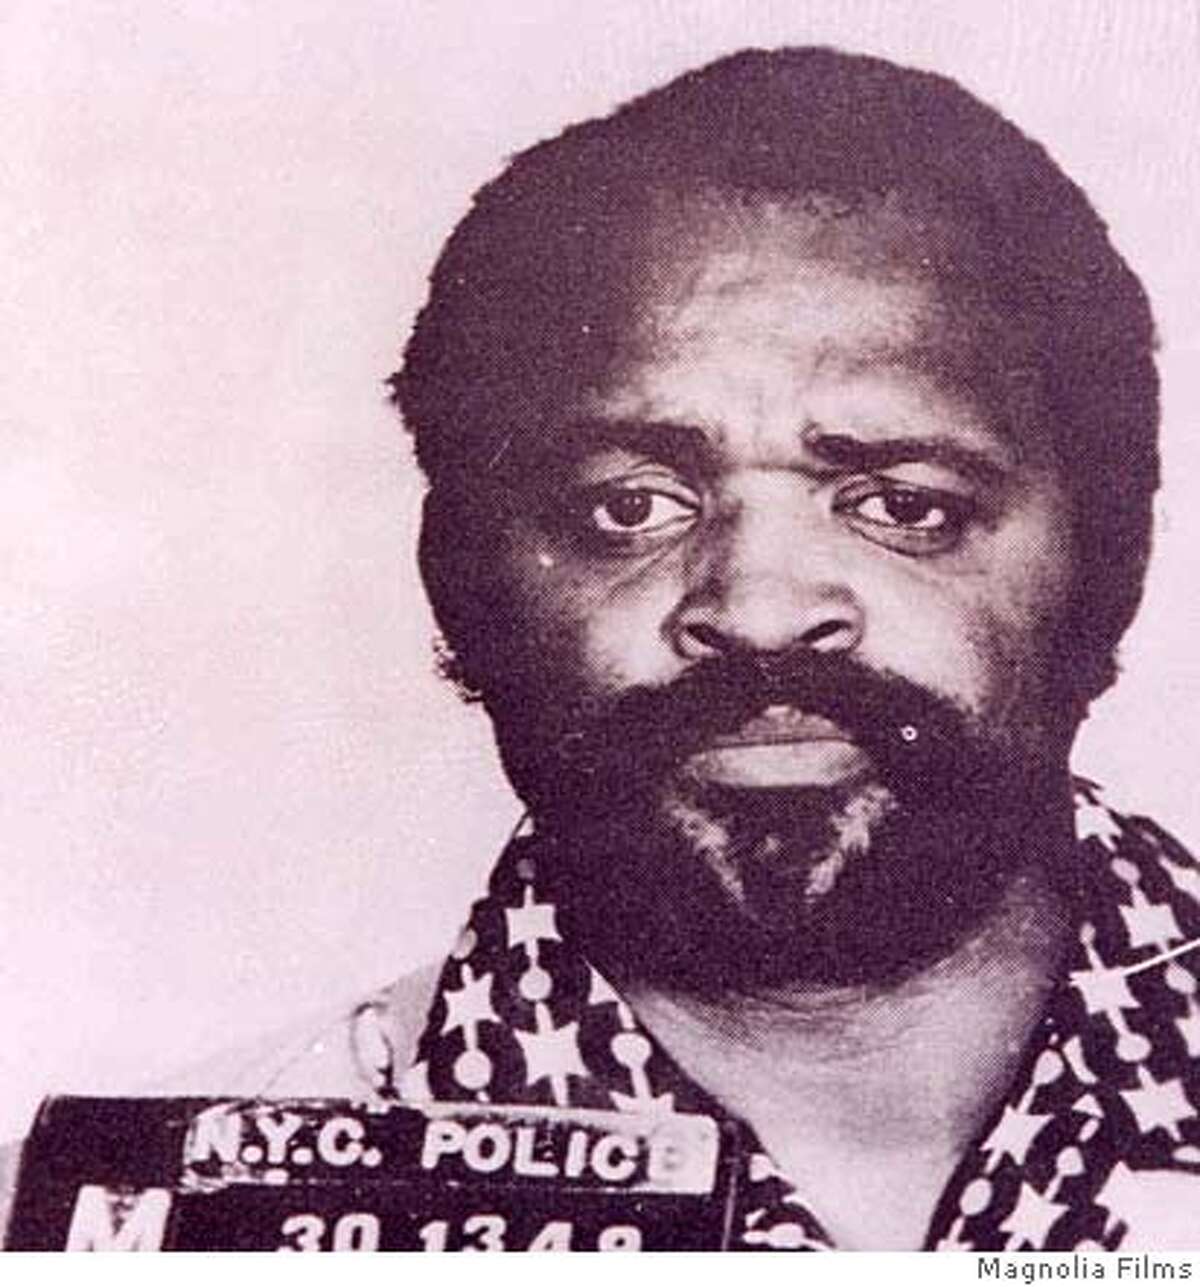 Nicky Barnes: $105 Million Barnes was the leader of a New York criminal organization known as The Council. He served time in a federal institution for drug trafficking and while in prison he became a government informant.